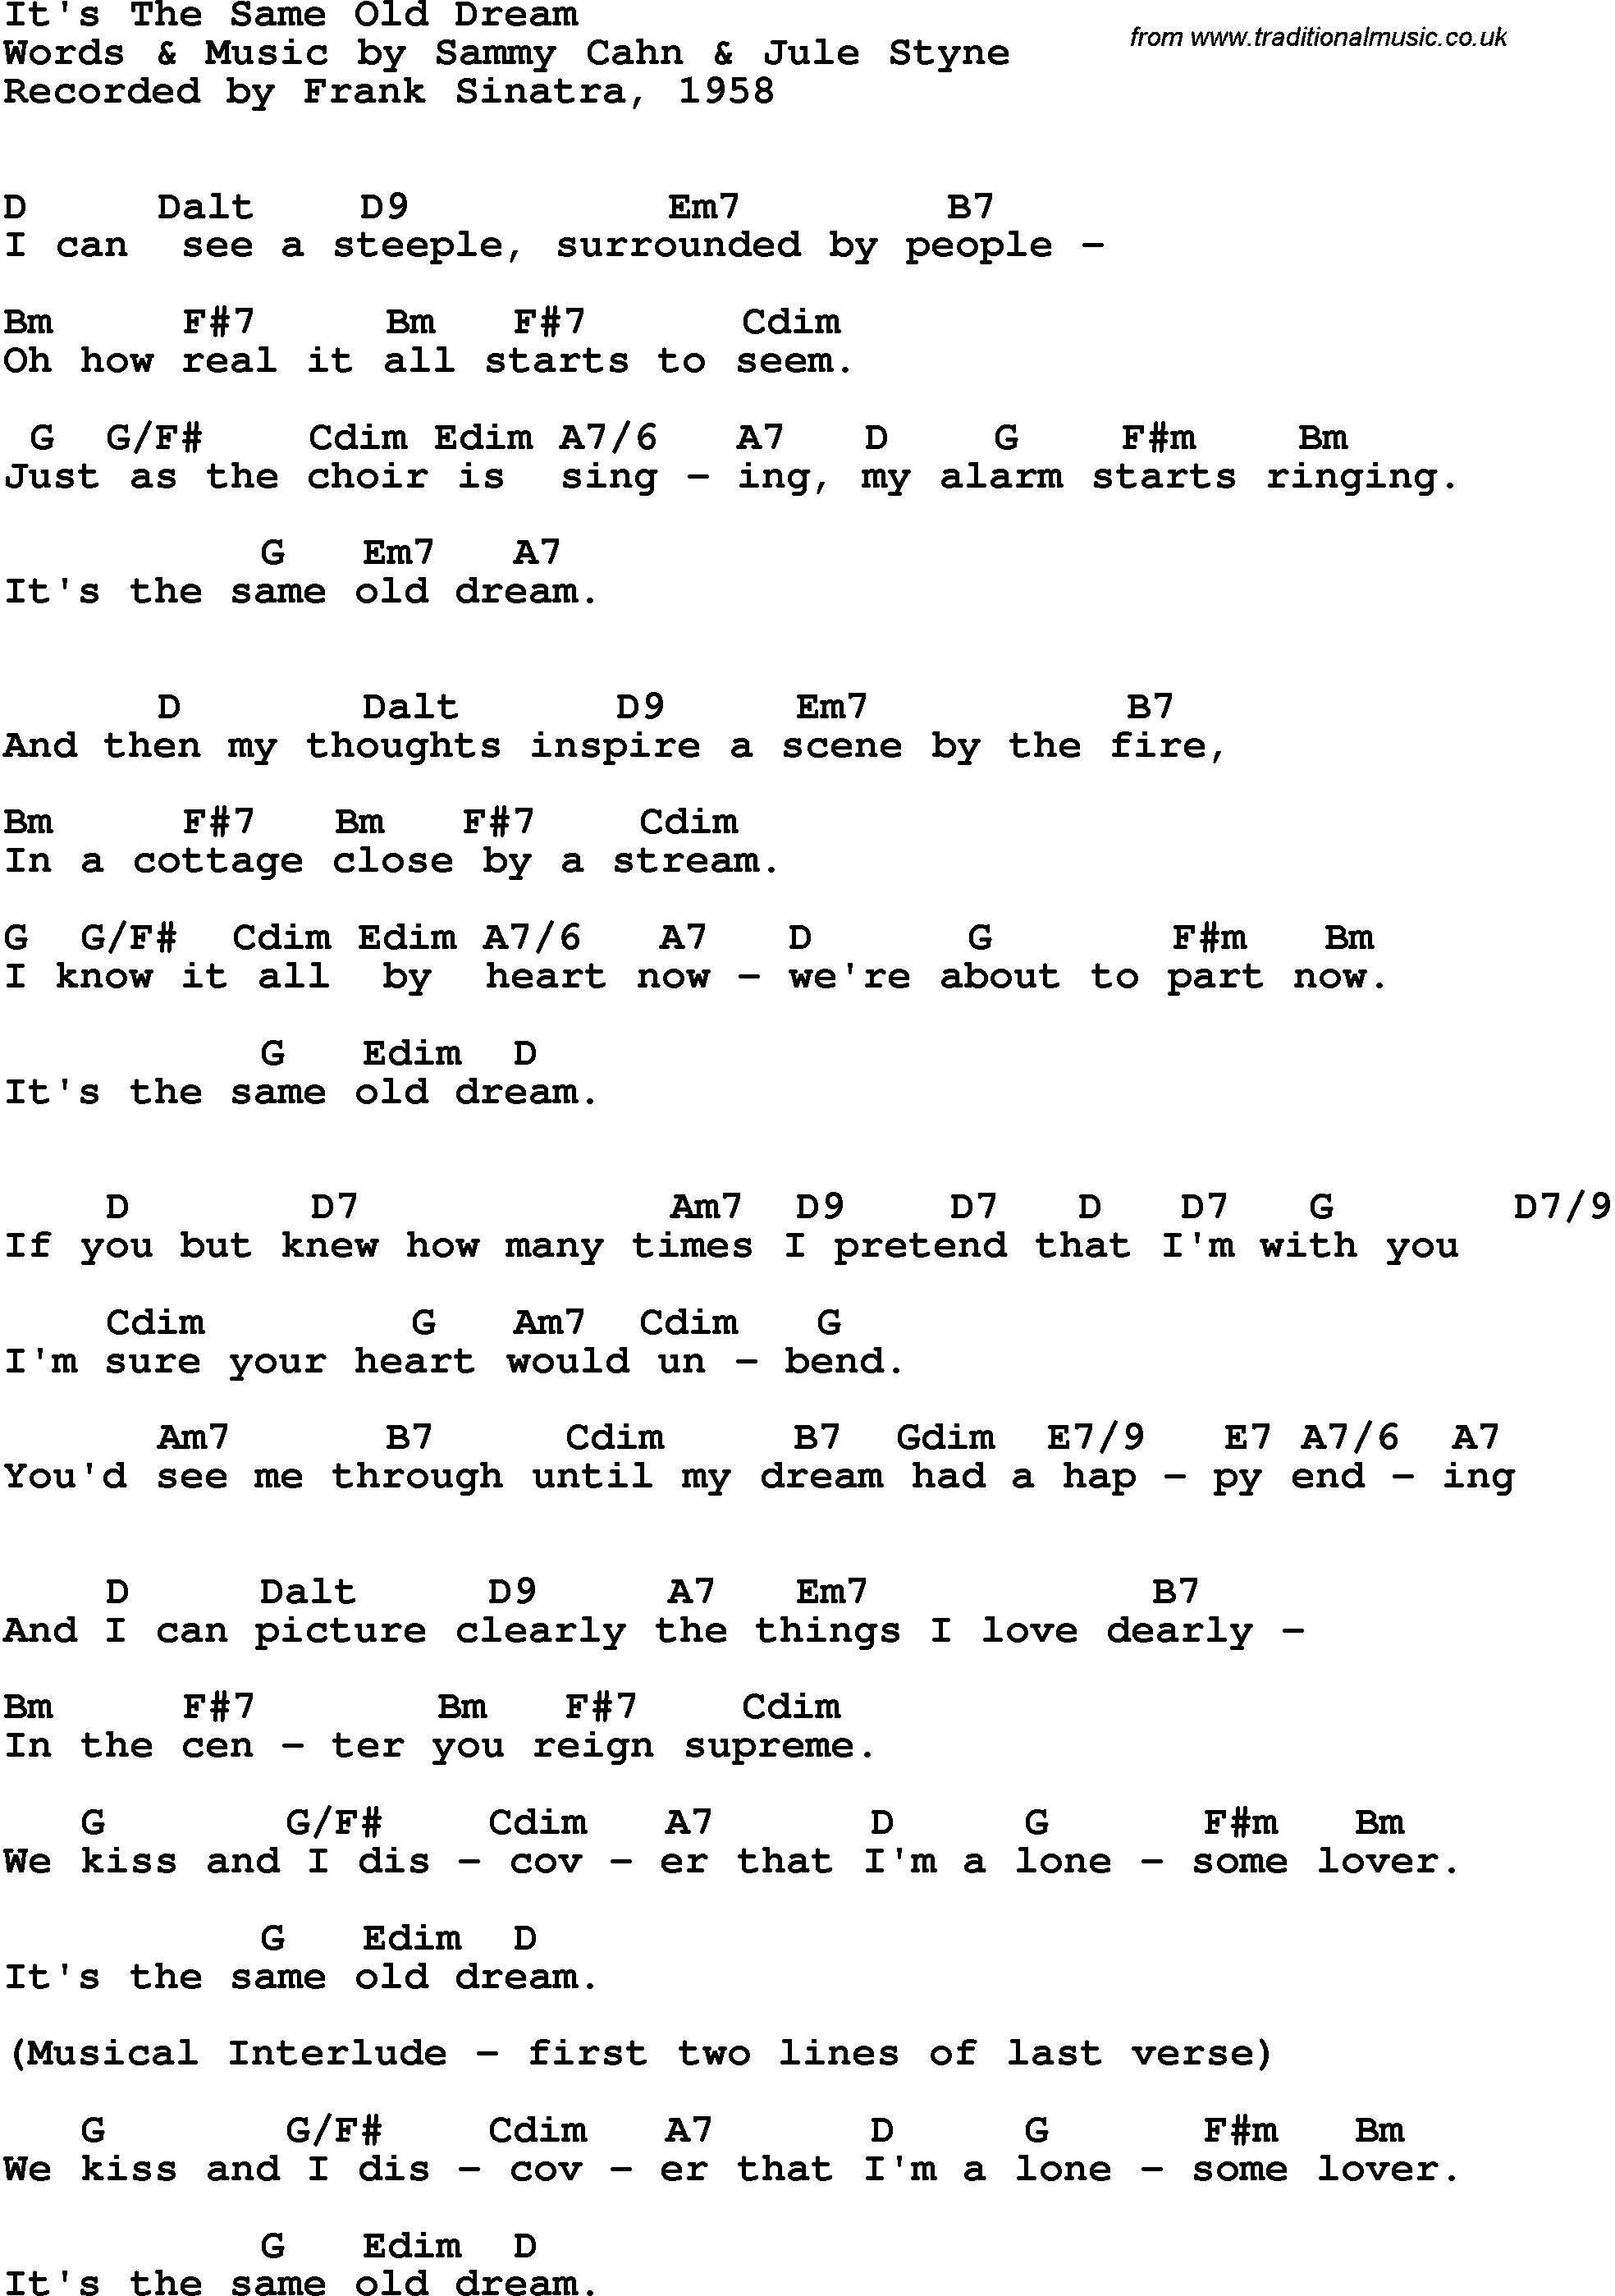 Song Lyrics with guitar chords for It's The Same Old Dream - Frank Sinatra, 1958